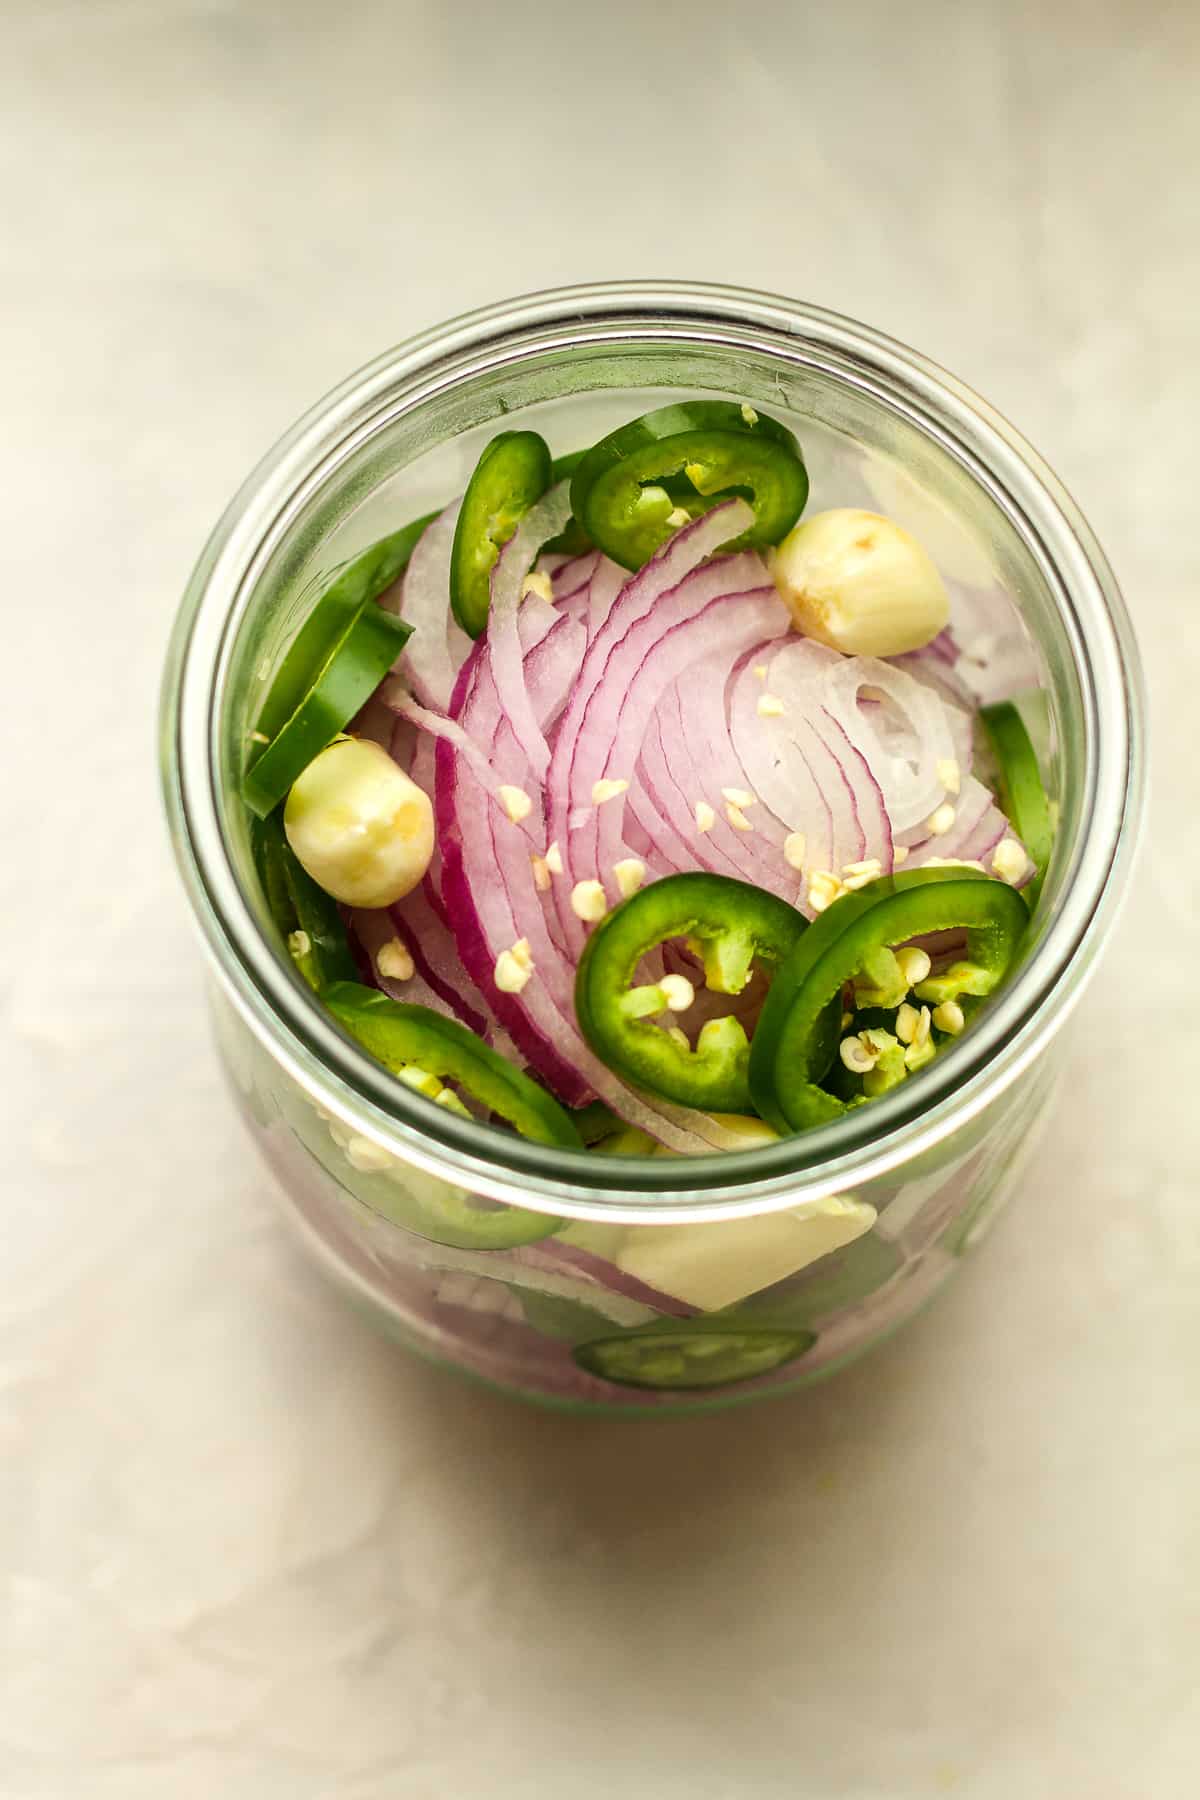 Overhead view of the pickled ingredients.